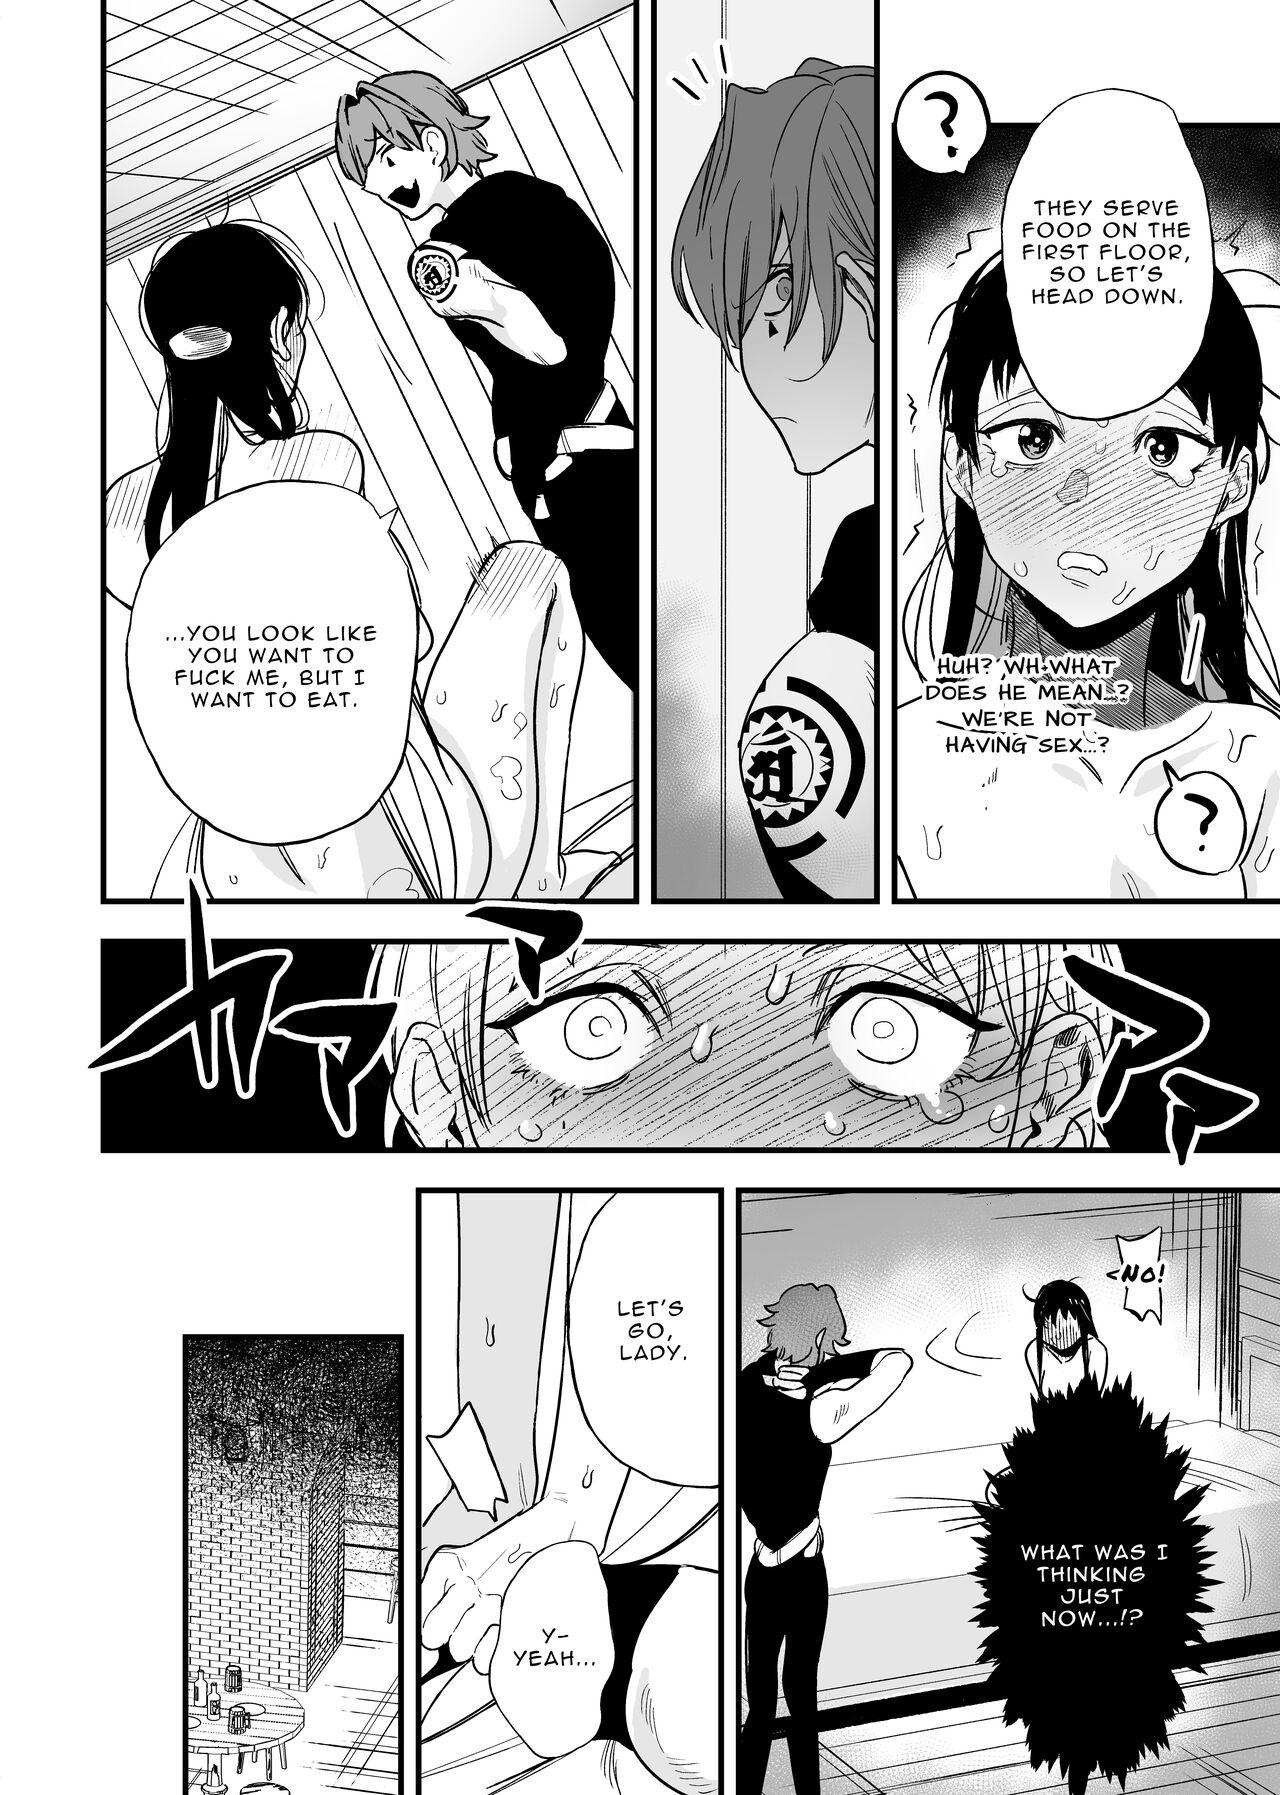 Sex Tape The Man Who Saved Me on my Isekai Trip was a Killer... 2 - Original Pinay - Page 12